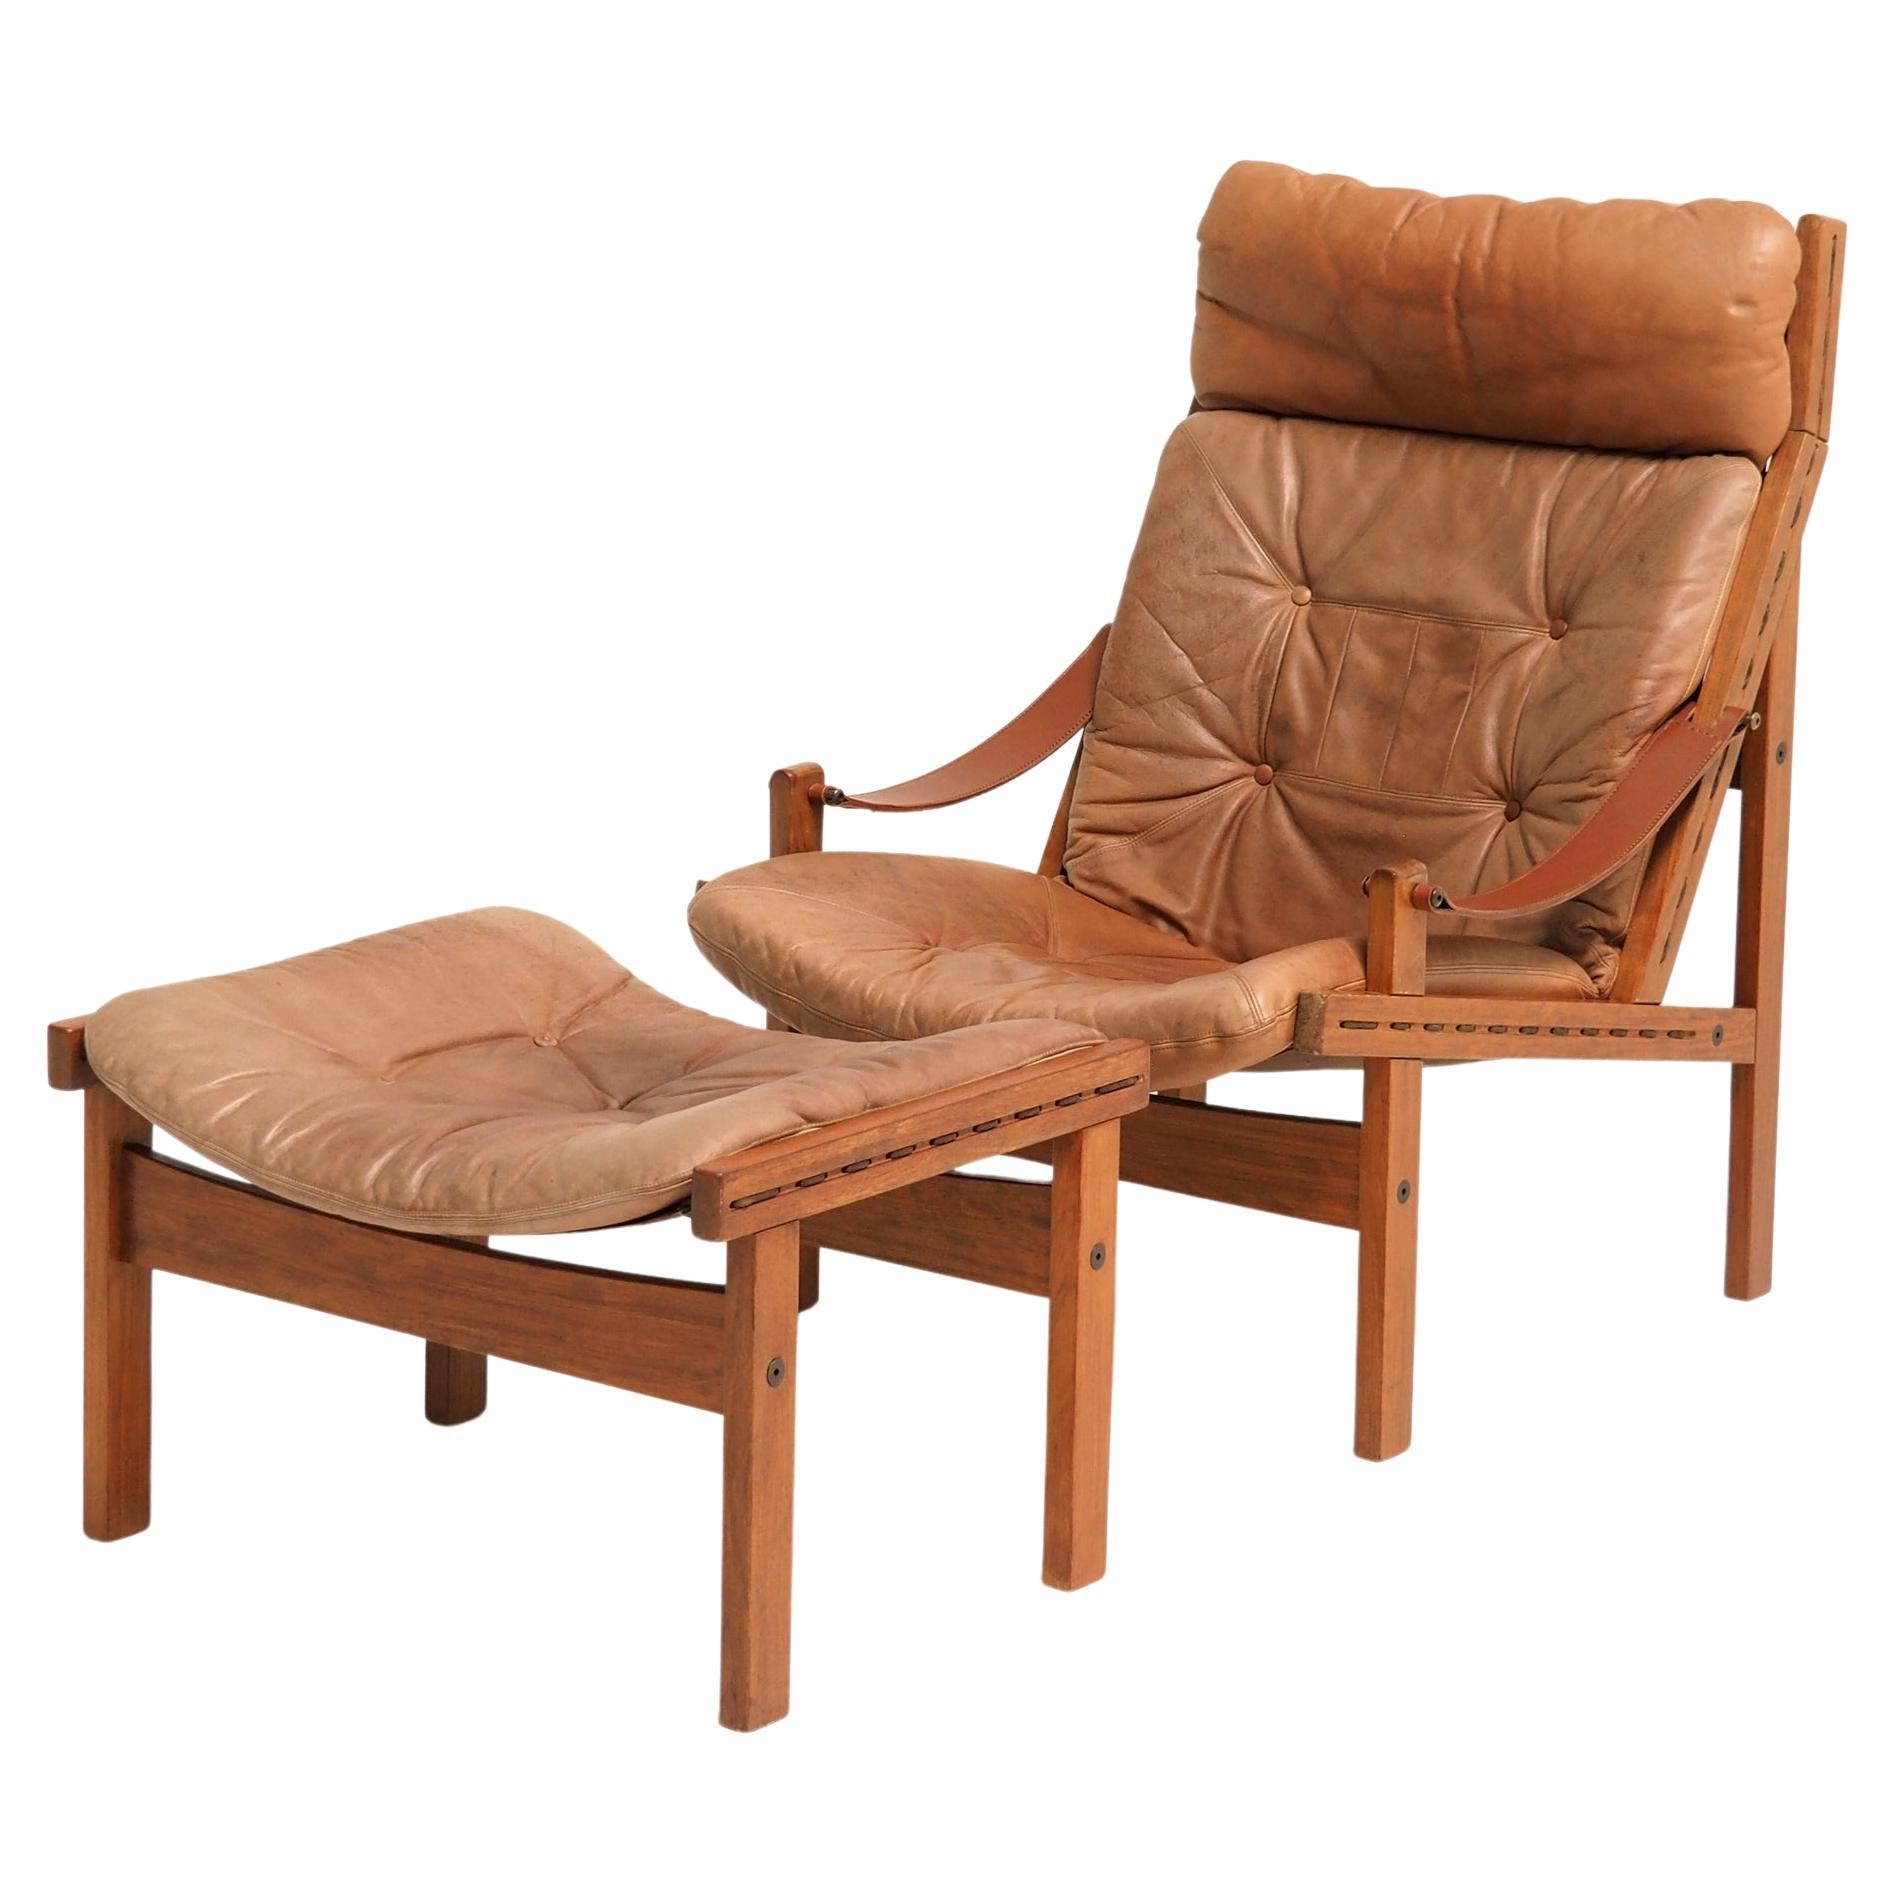 ‘Hunter Lounge Chair’ with Original Ottoman by Torbjørn Afdal, Norway 1962 For Sale